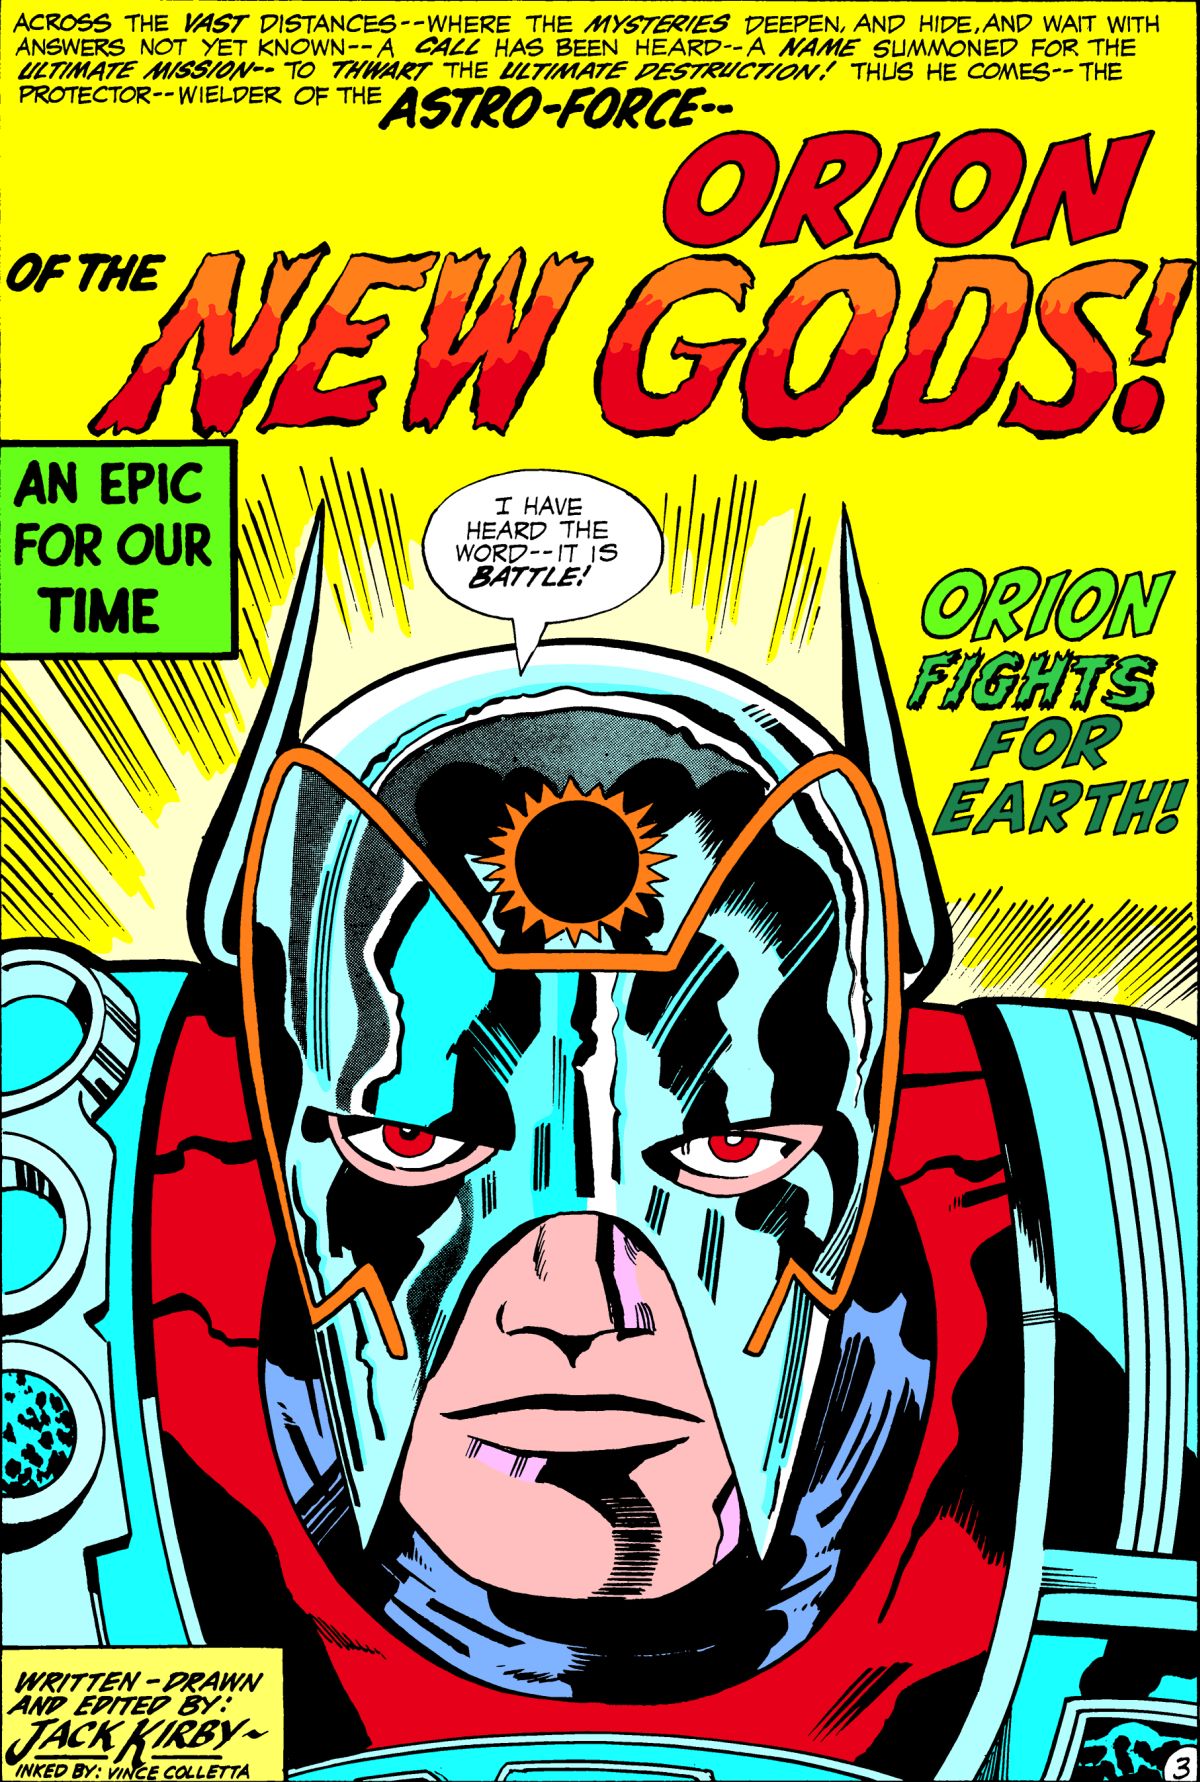 THE NEW GODS BY JACK KIRBY TP 